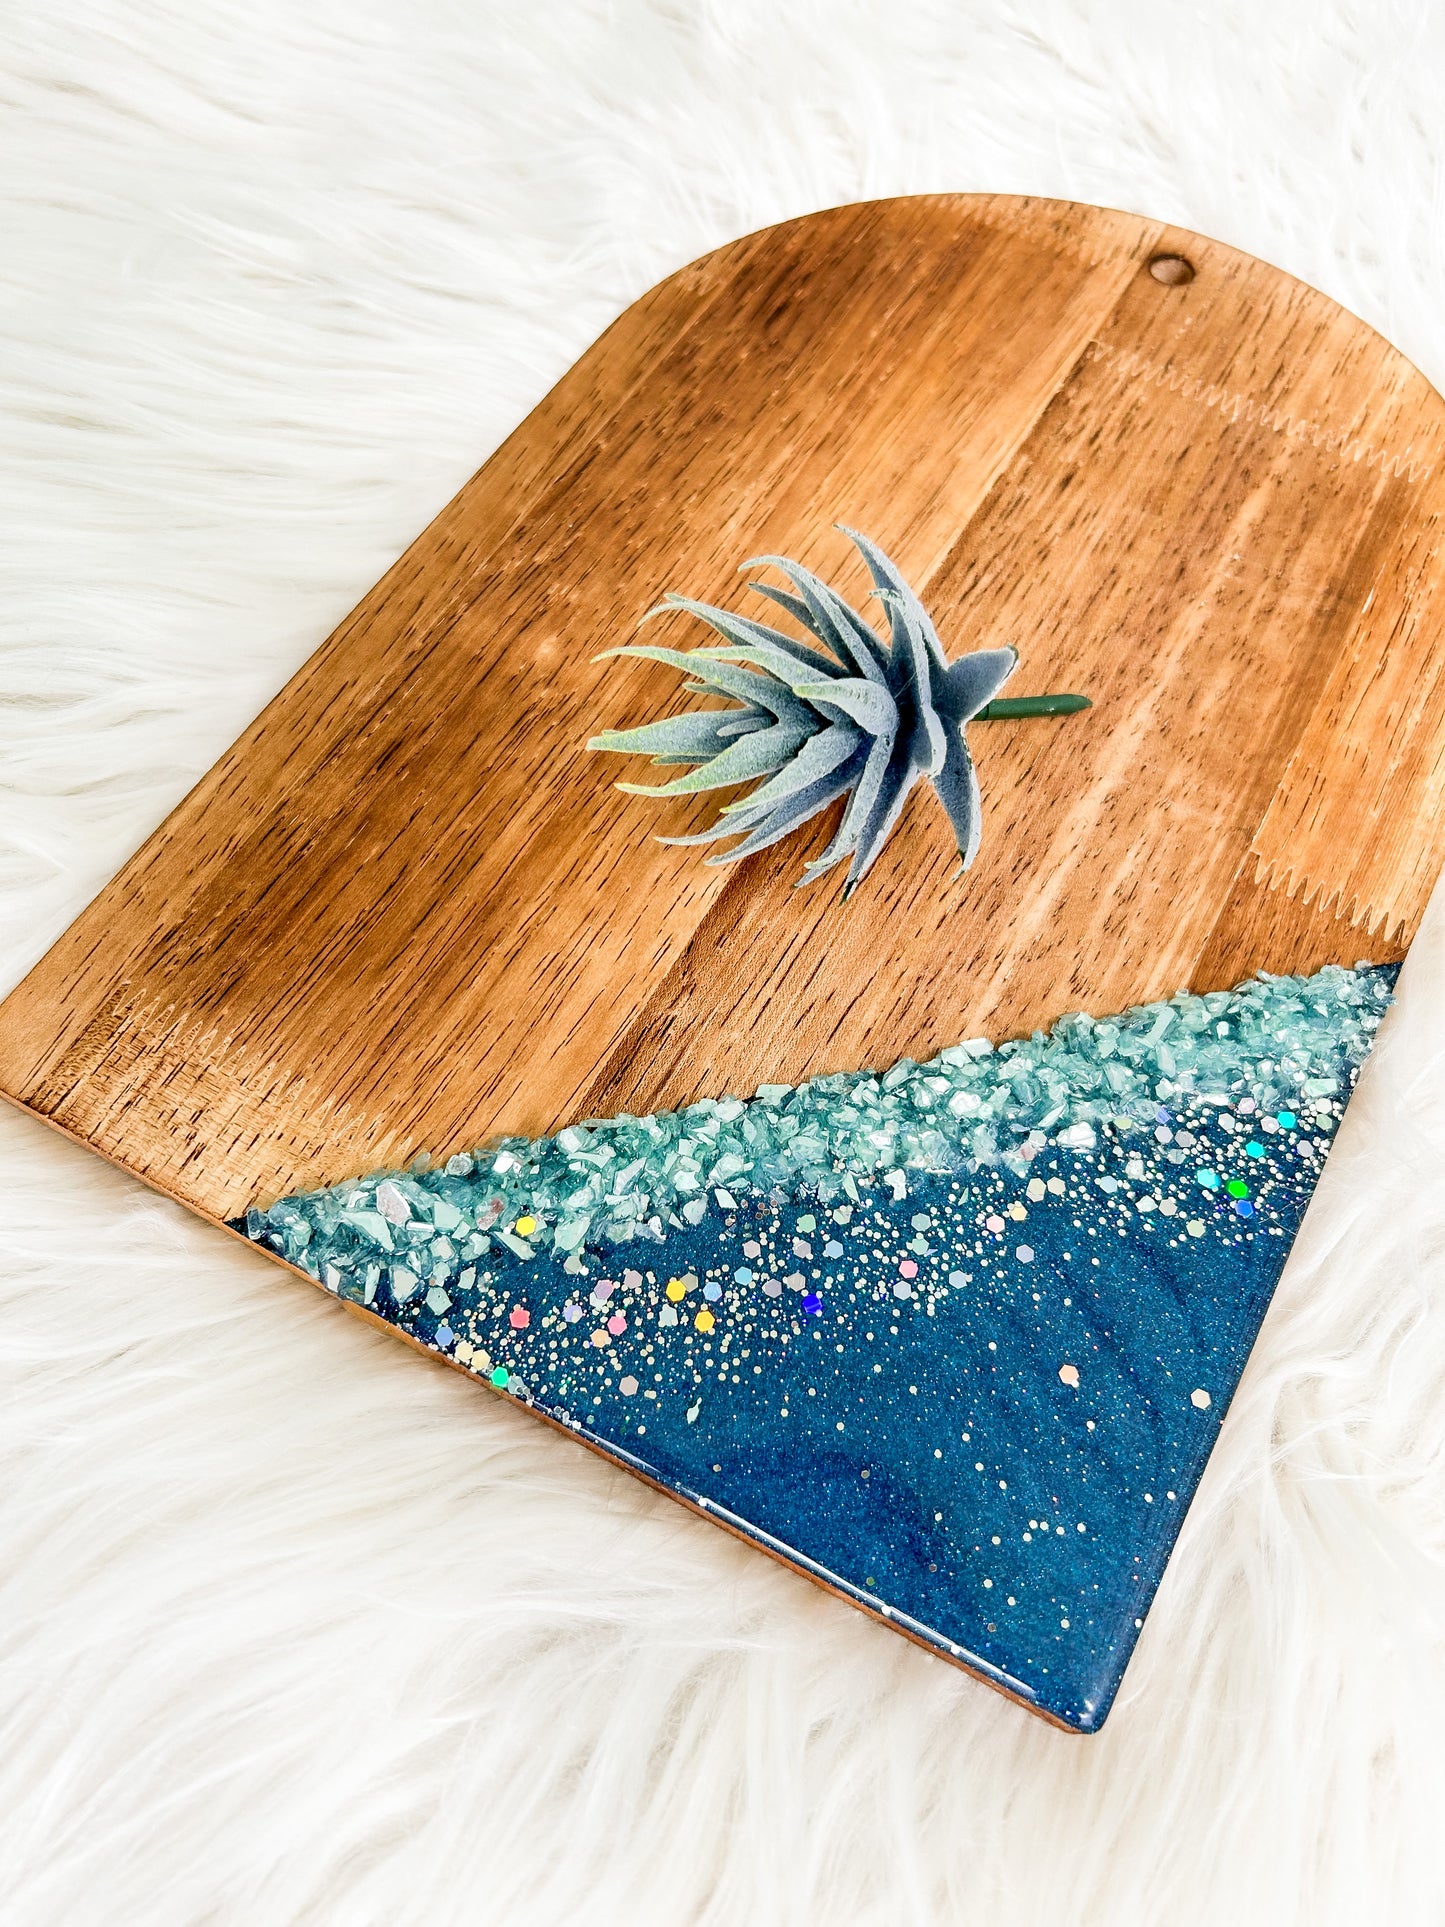 Starry Midnight Bejeweled Serving Board